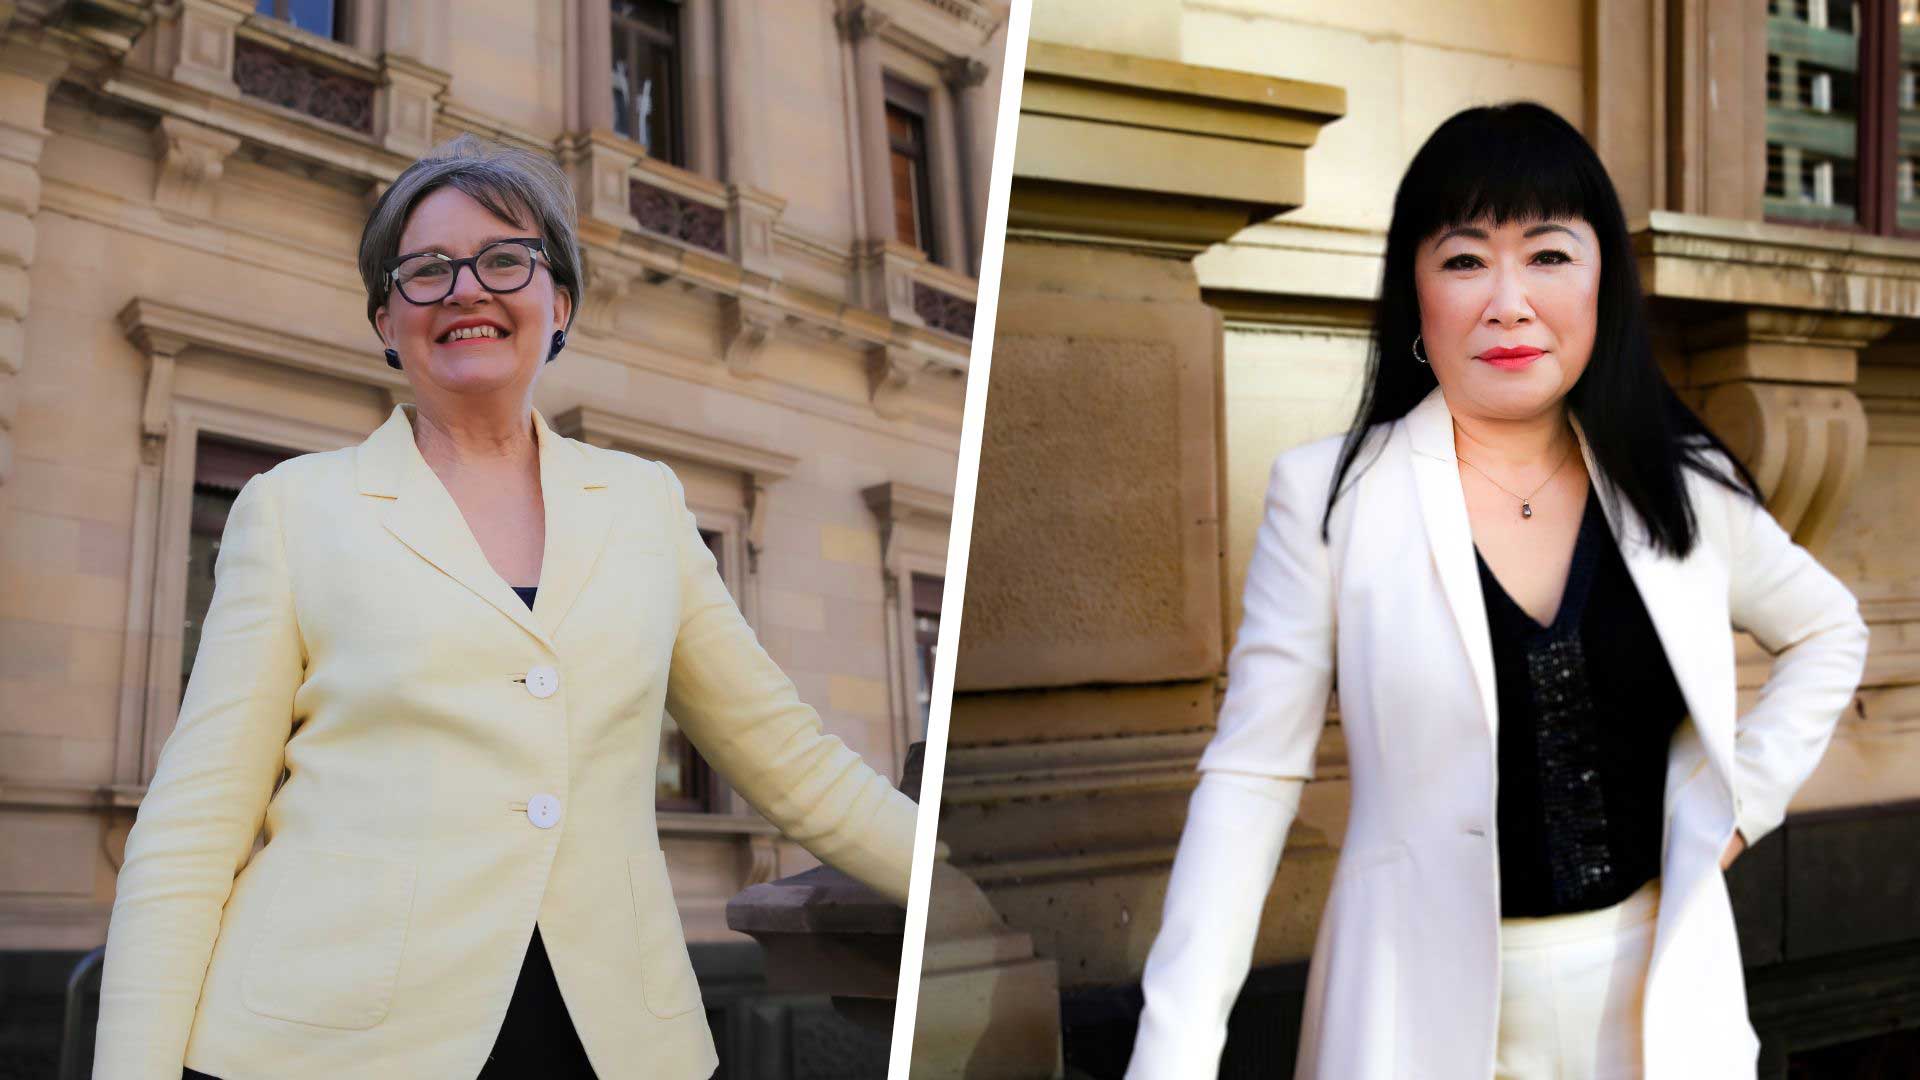 Photos of Susan Benedyka and Karen Kim smiling in front of a historic building